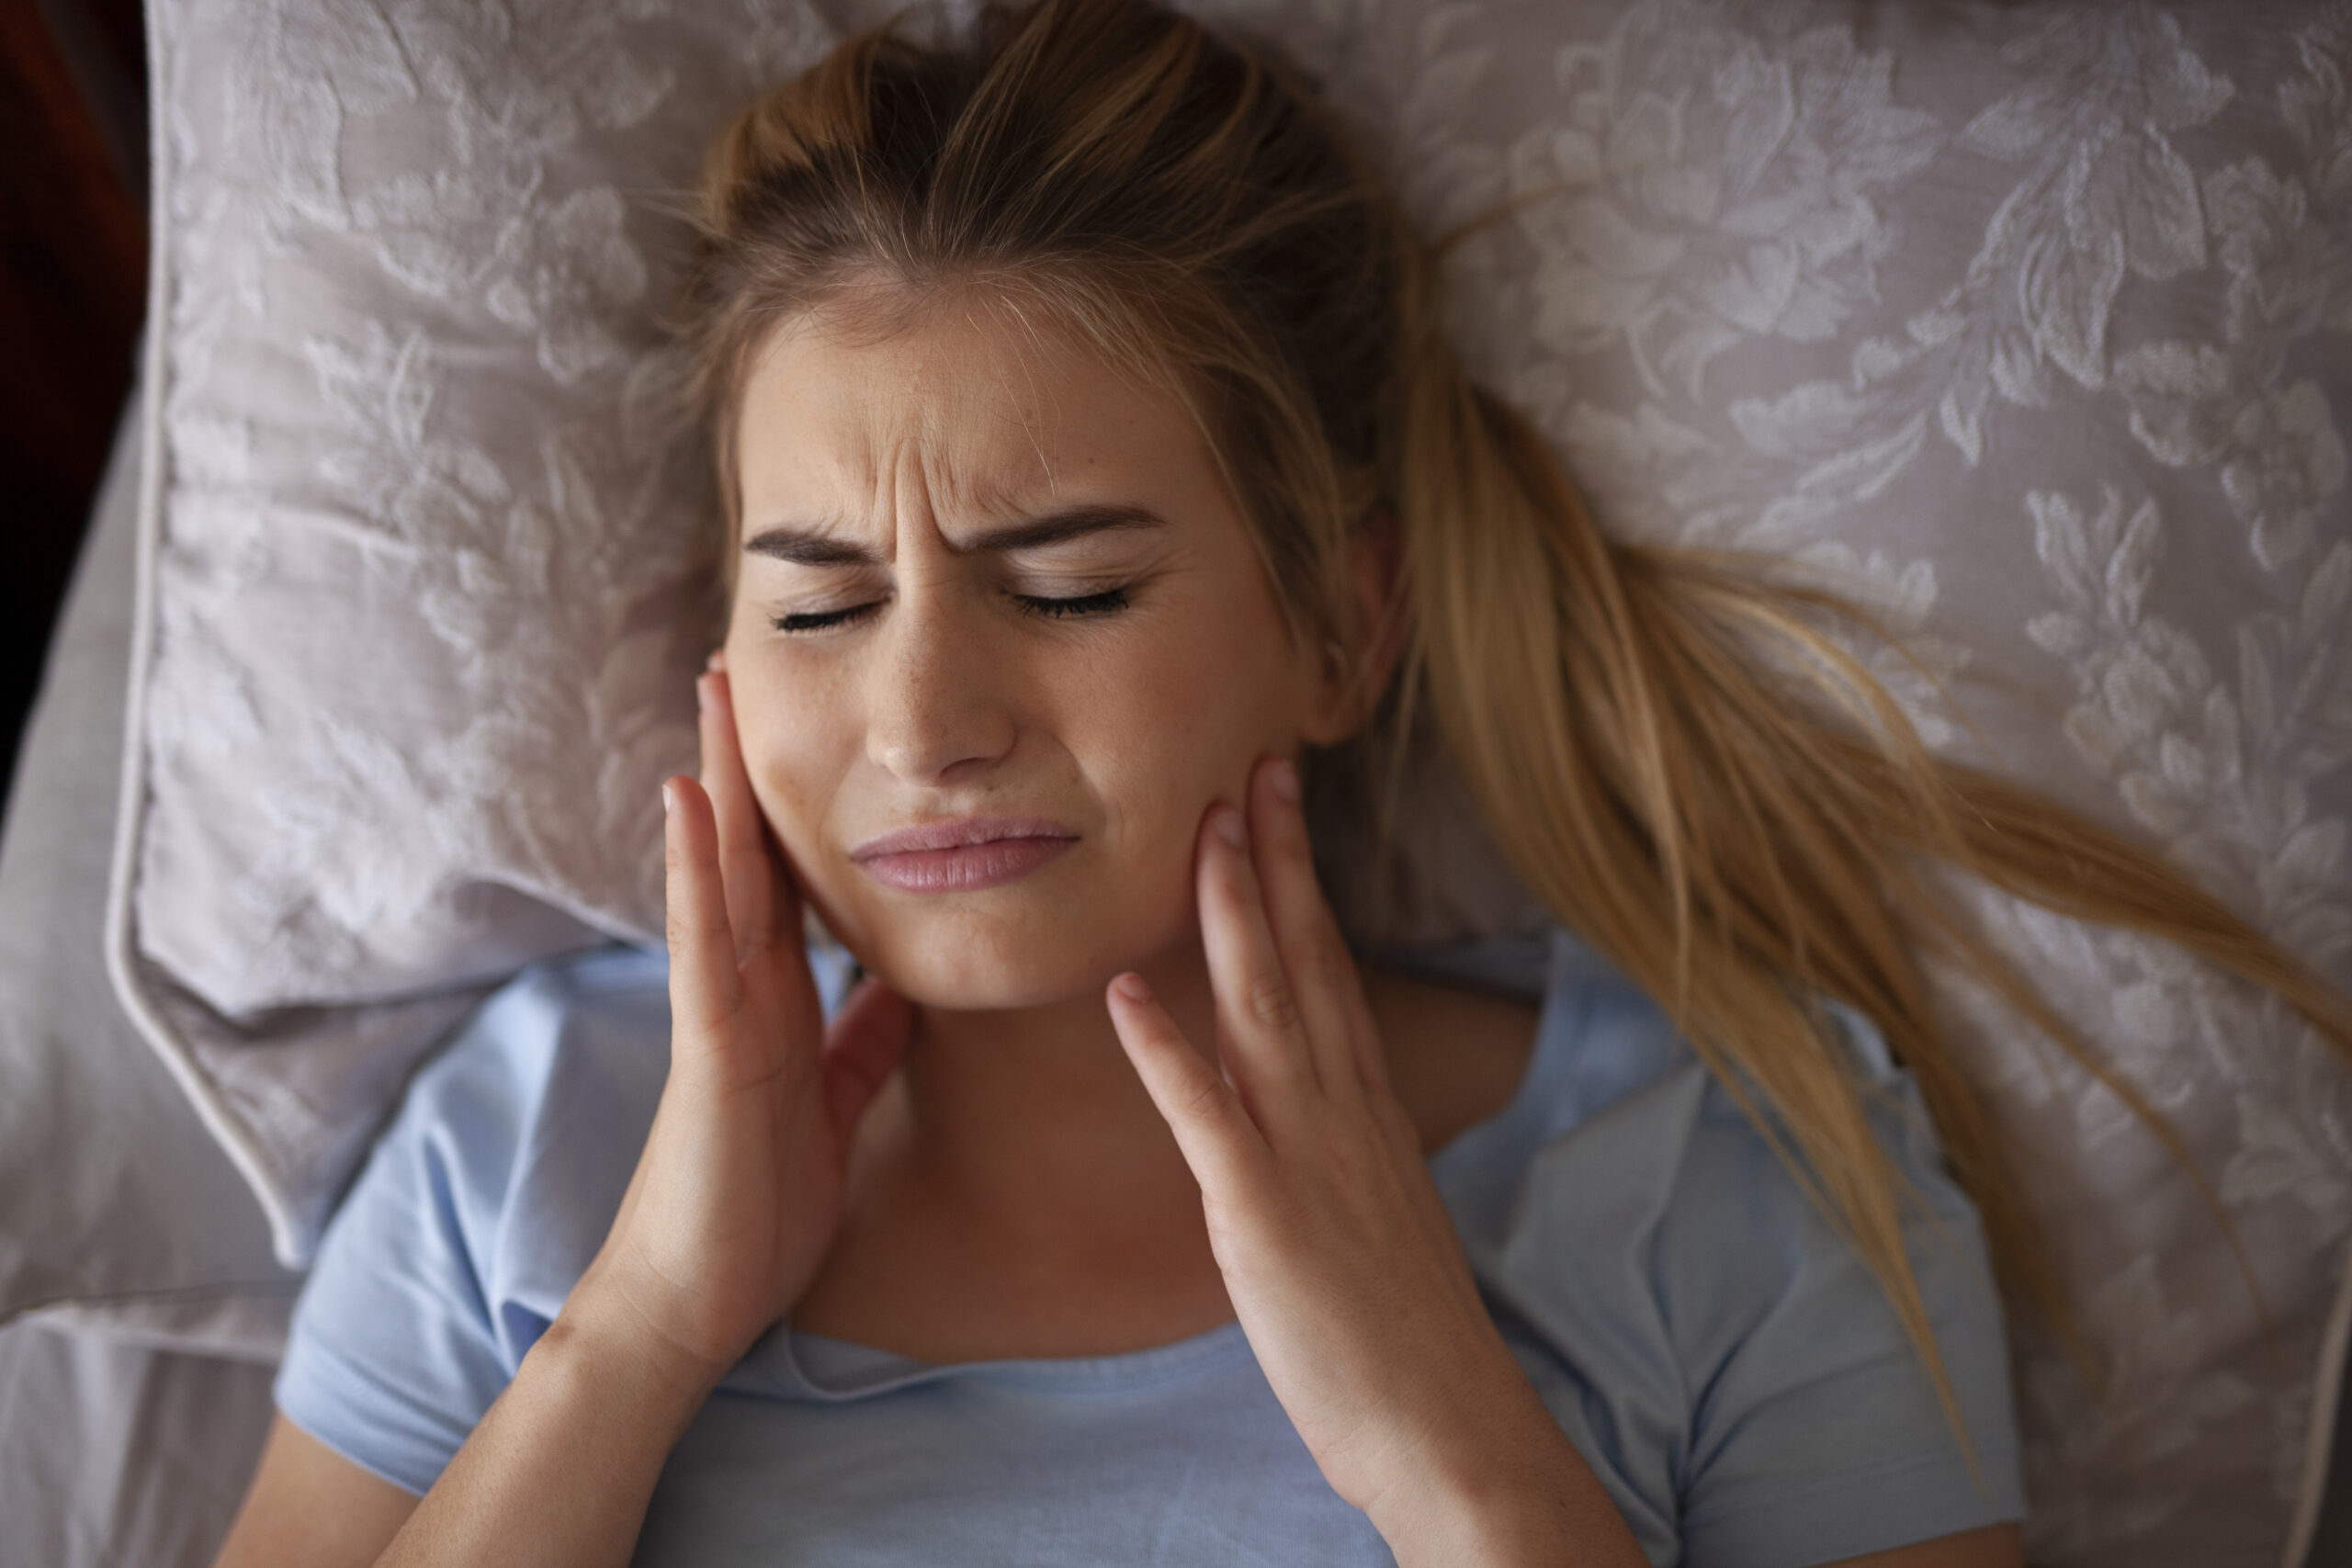 Bruxism (tooth grinding) can really bruise your teeth, and Dr. Damon wants to help you combat and stop grinding your teeth in your sleep.